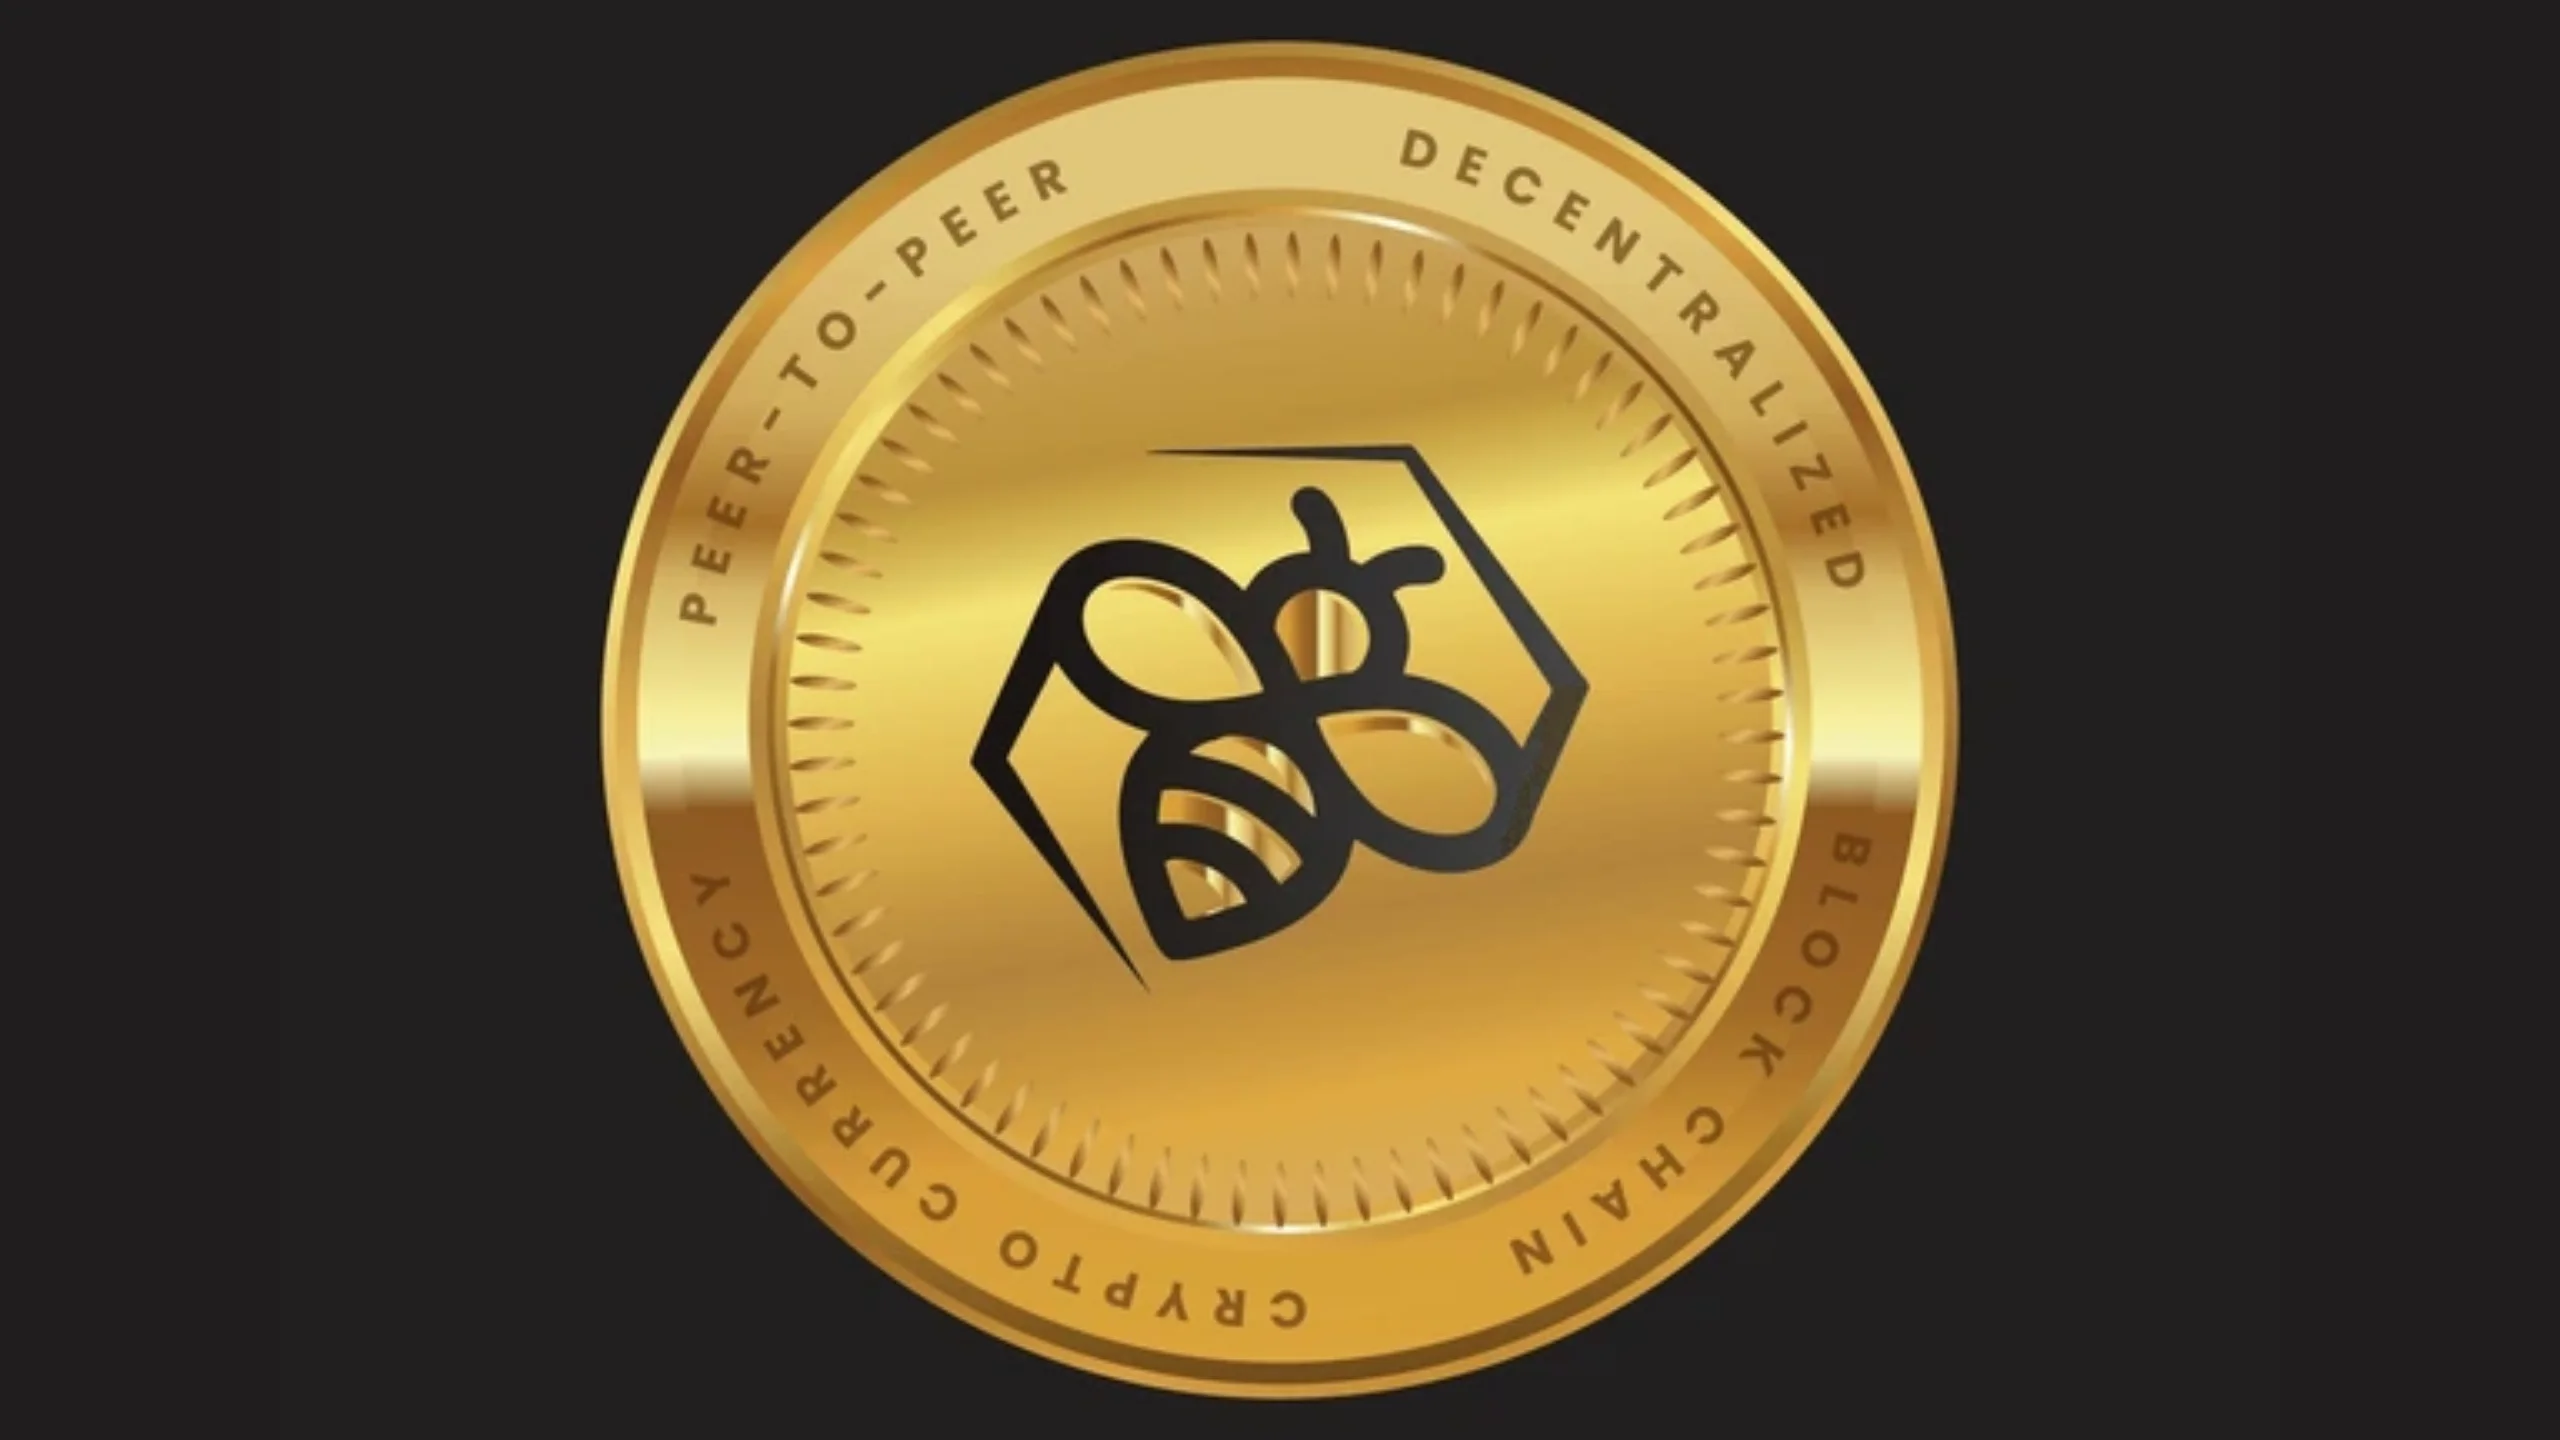 Bee Token logo representing the decentralized home-sharing platform built on blockchain technology. Bee Token aims to provide secure, commission-free transactions for hosts and guests, leveraging smart contracts for trust and transparency.